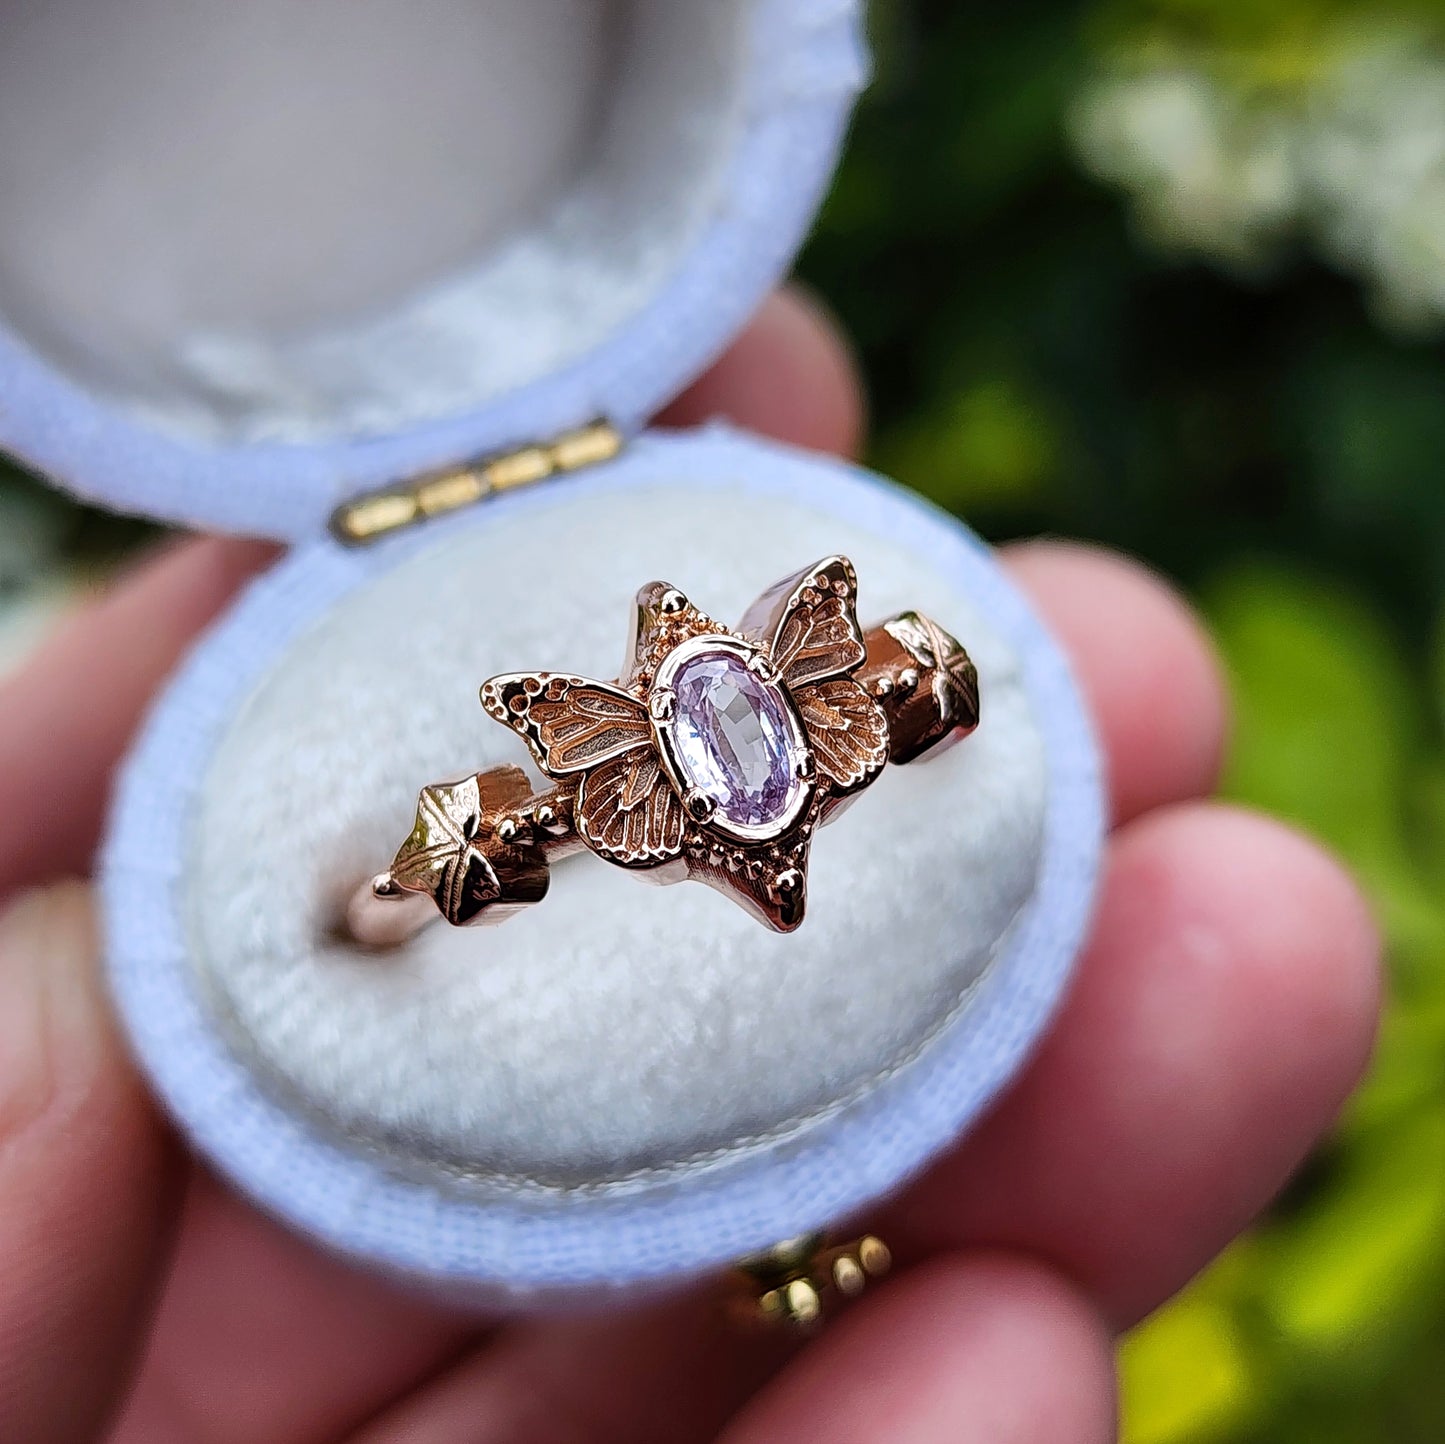 Butterfly Faerie Ring with Lavender Sapphire Fairy Fantasy Engagement with Ivy Leaf Fairytale 14k Rose Gold - Ready to Ship Size 6-8